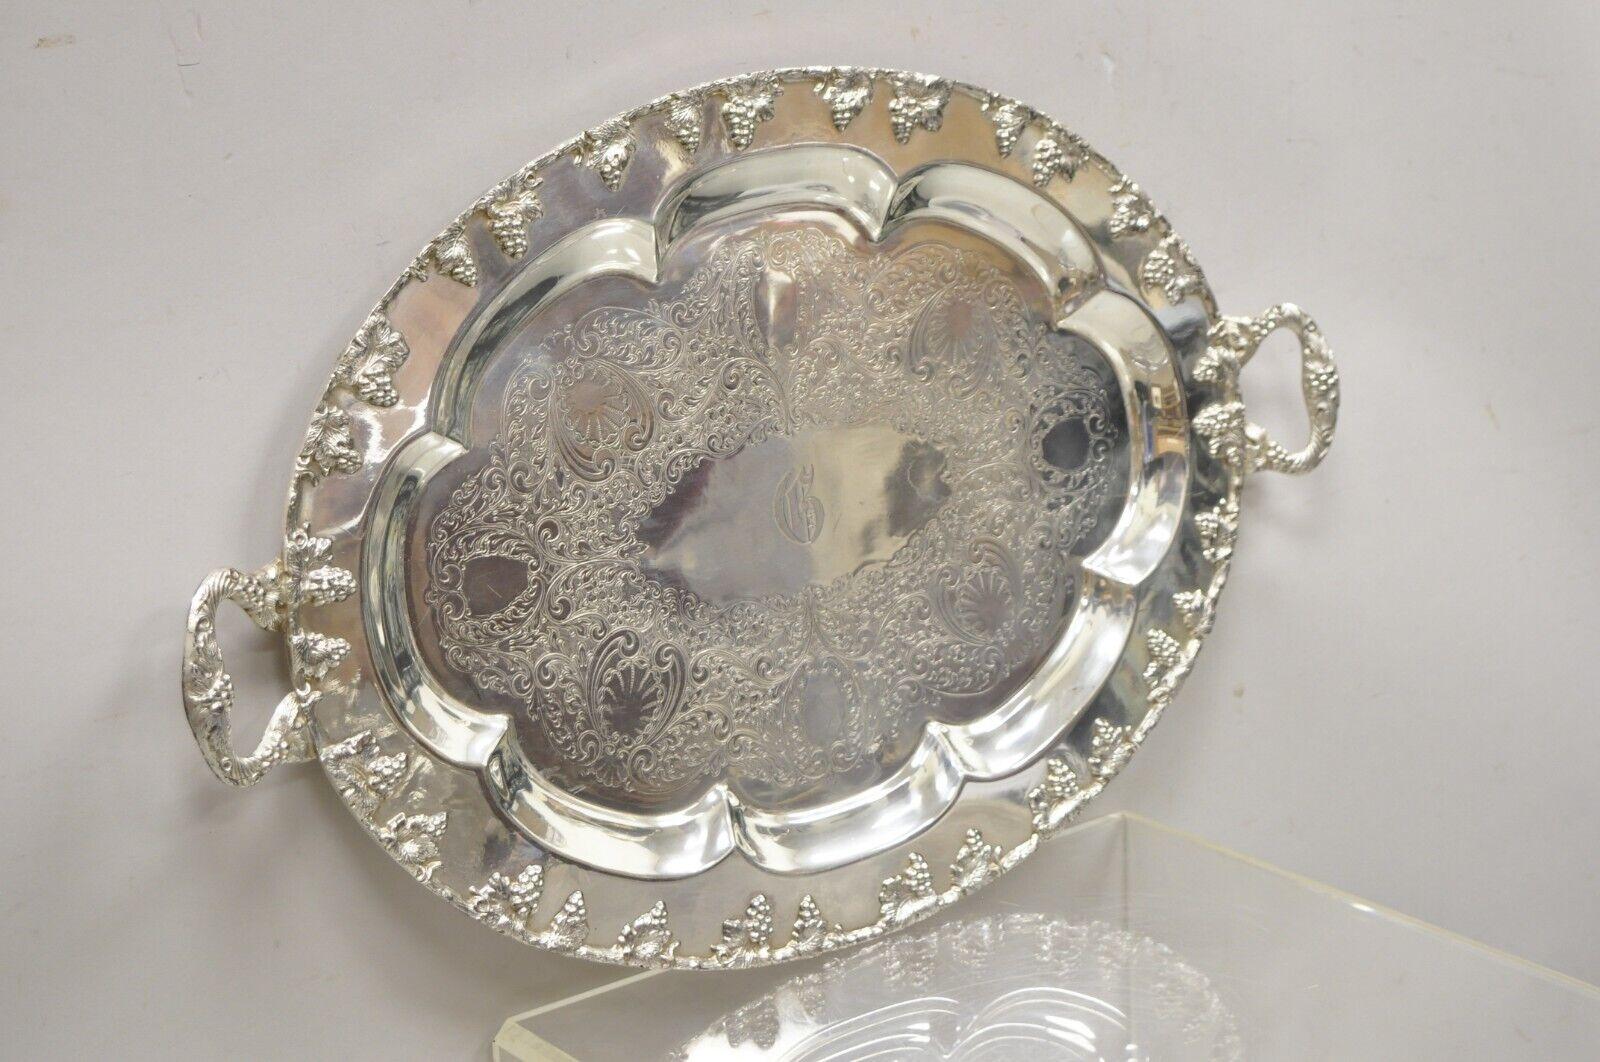 Vintage English Victorian regency silver plate oval grapevine platter tray with monogram. Item features a 